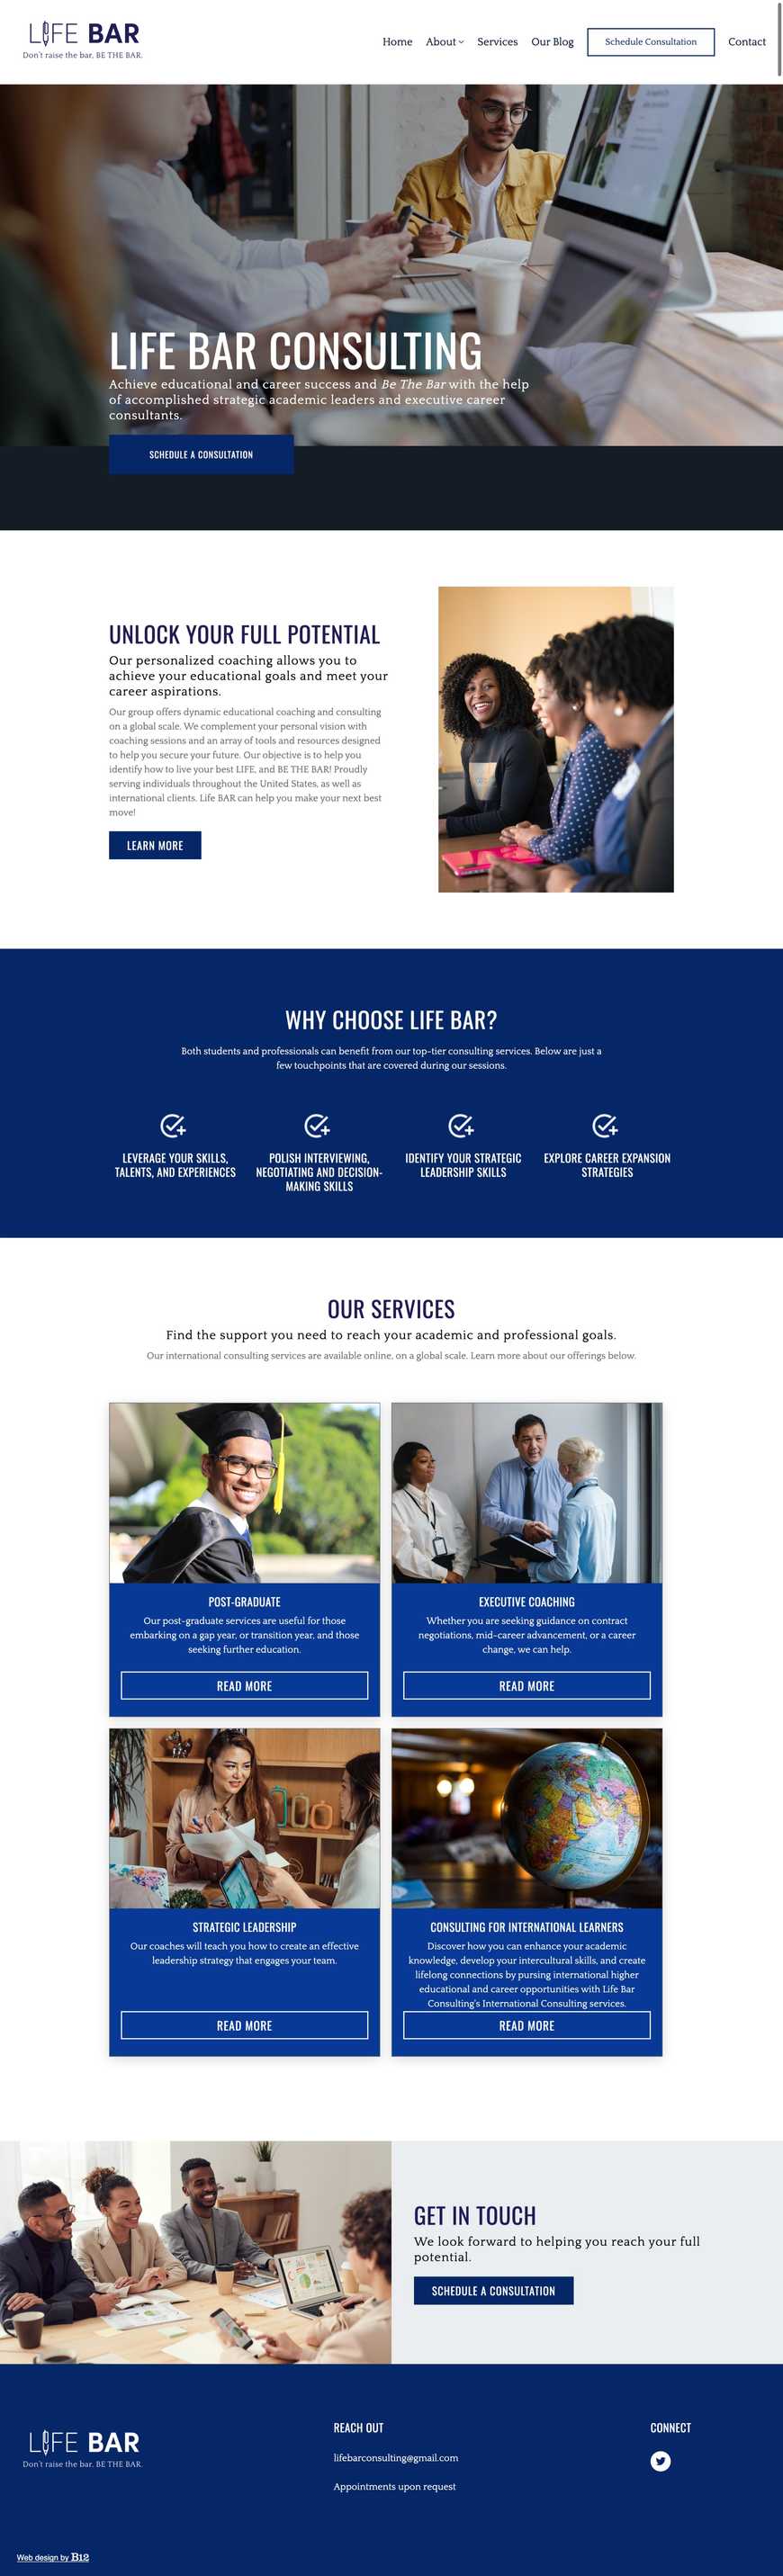 Life Bar Consulting